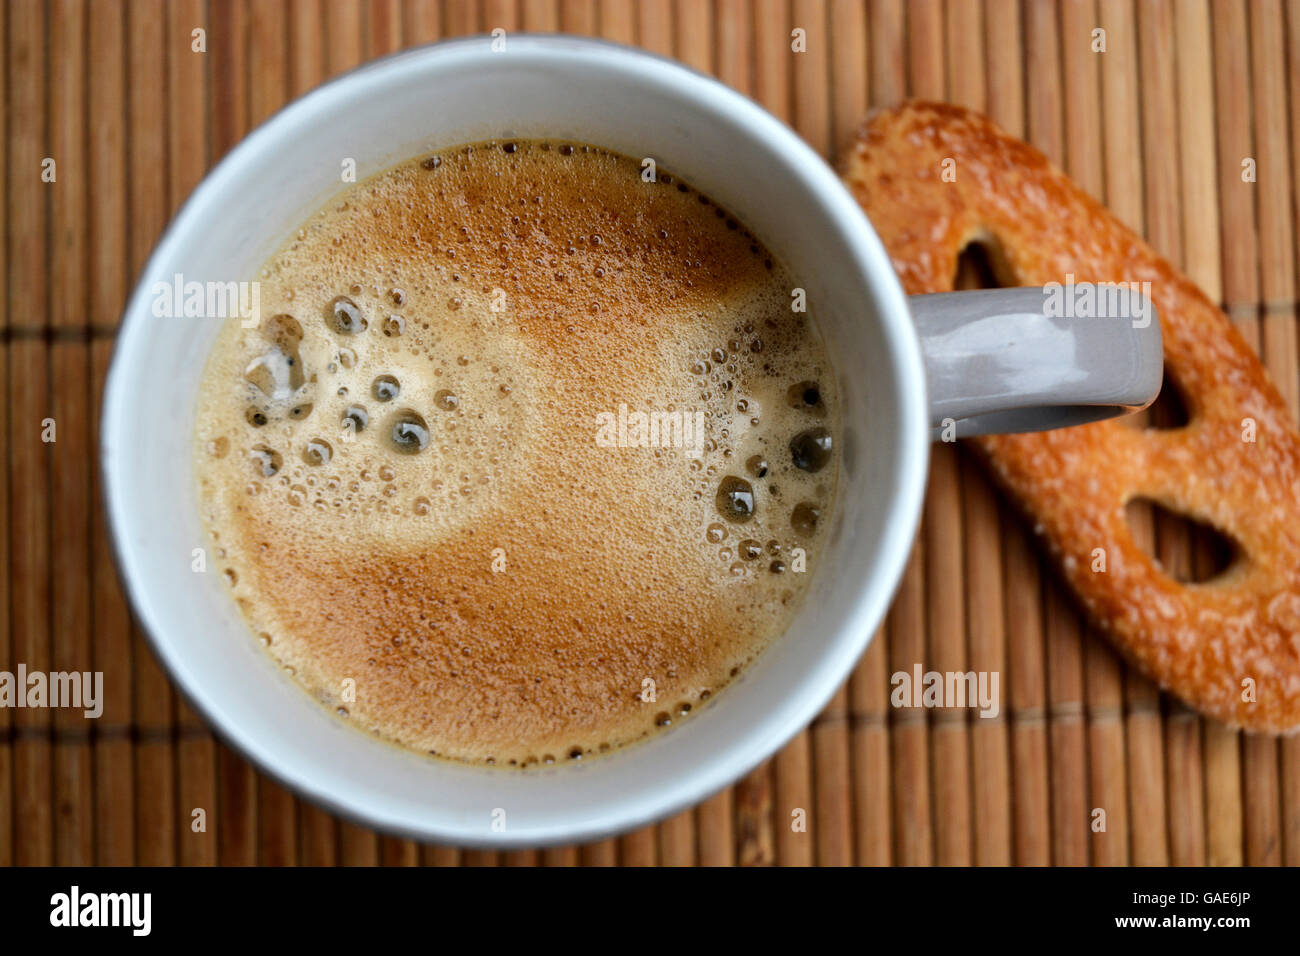 Grey cup of coffee in a mug on a bamboo placemat with cairn zen stones Stock Photo